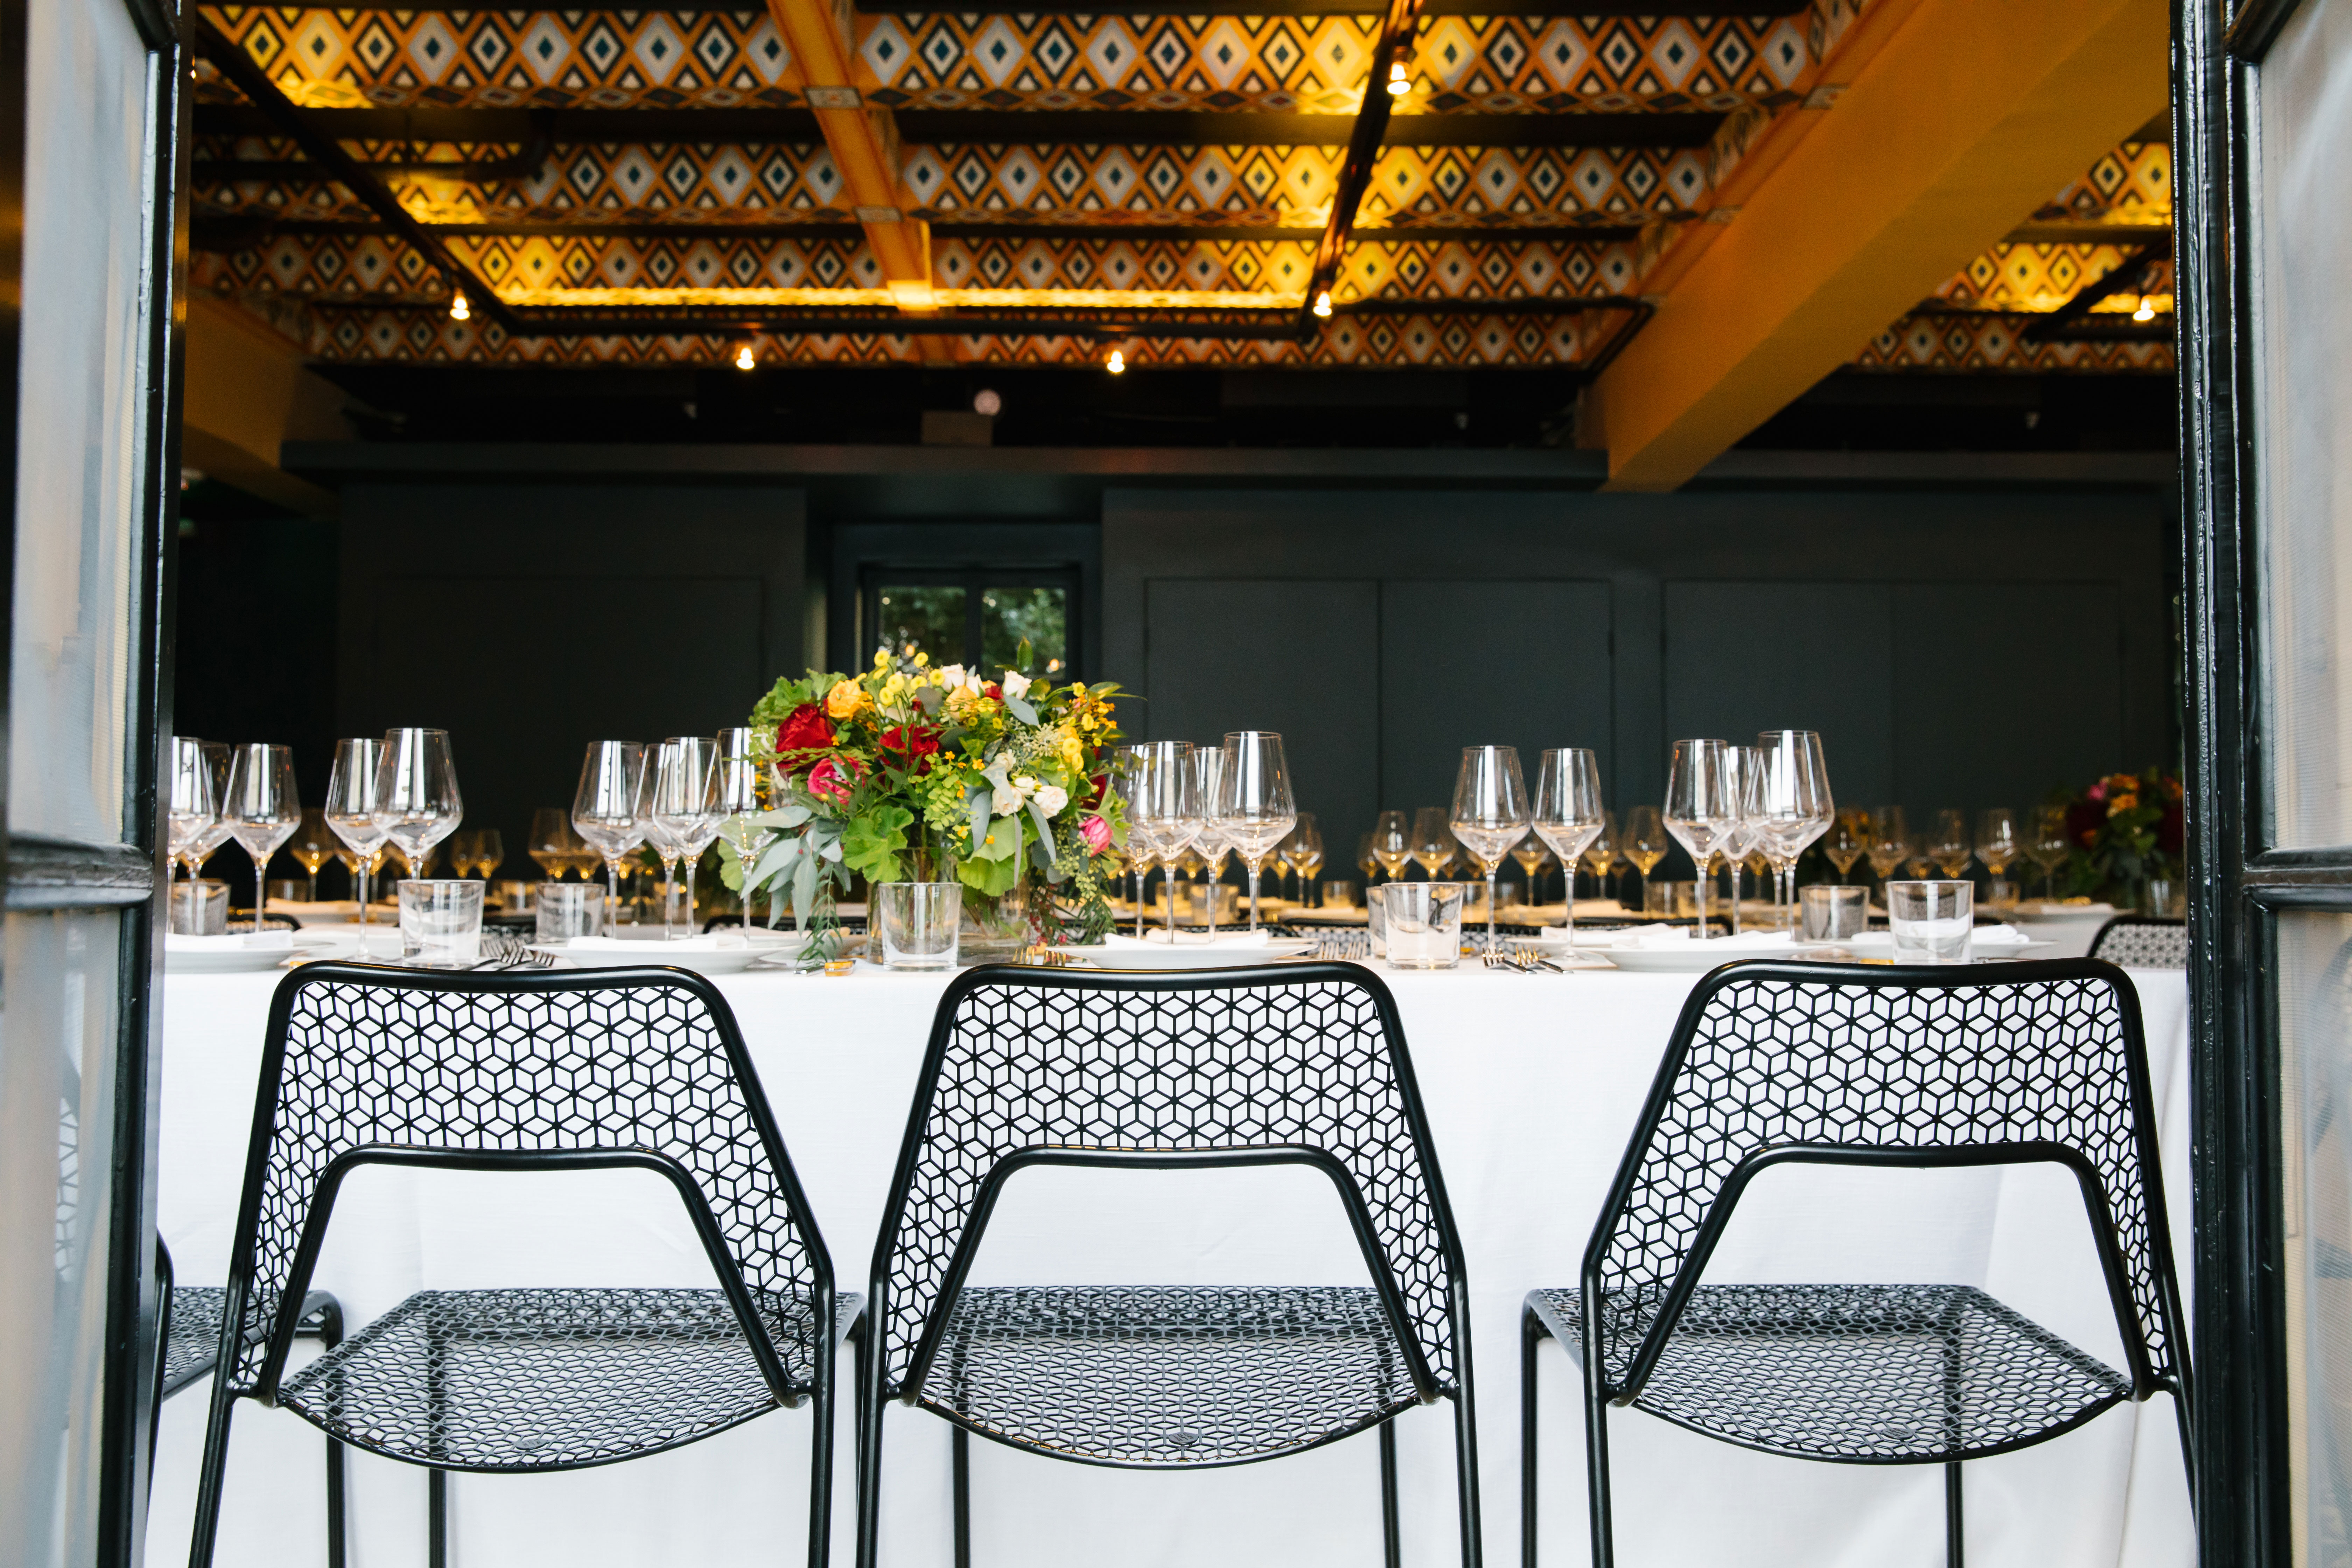 Table Settings and Three Chairs